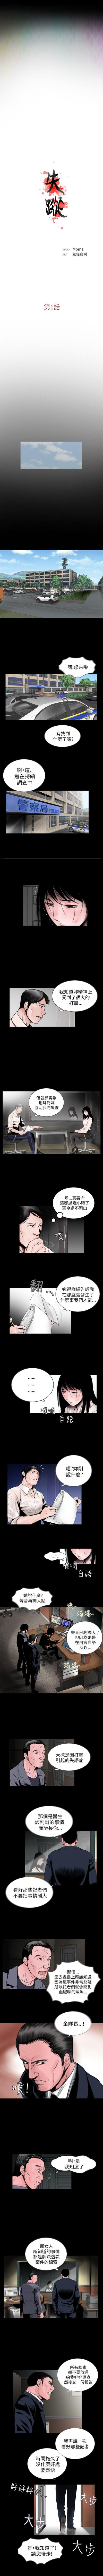 8teenxxx 失蹤 1-28 Chat - Page 5